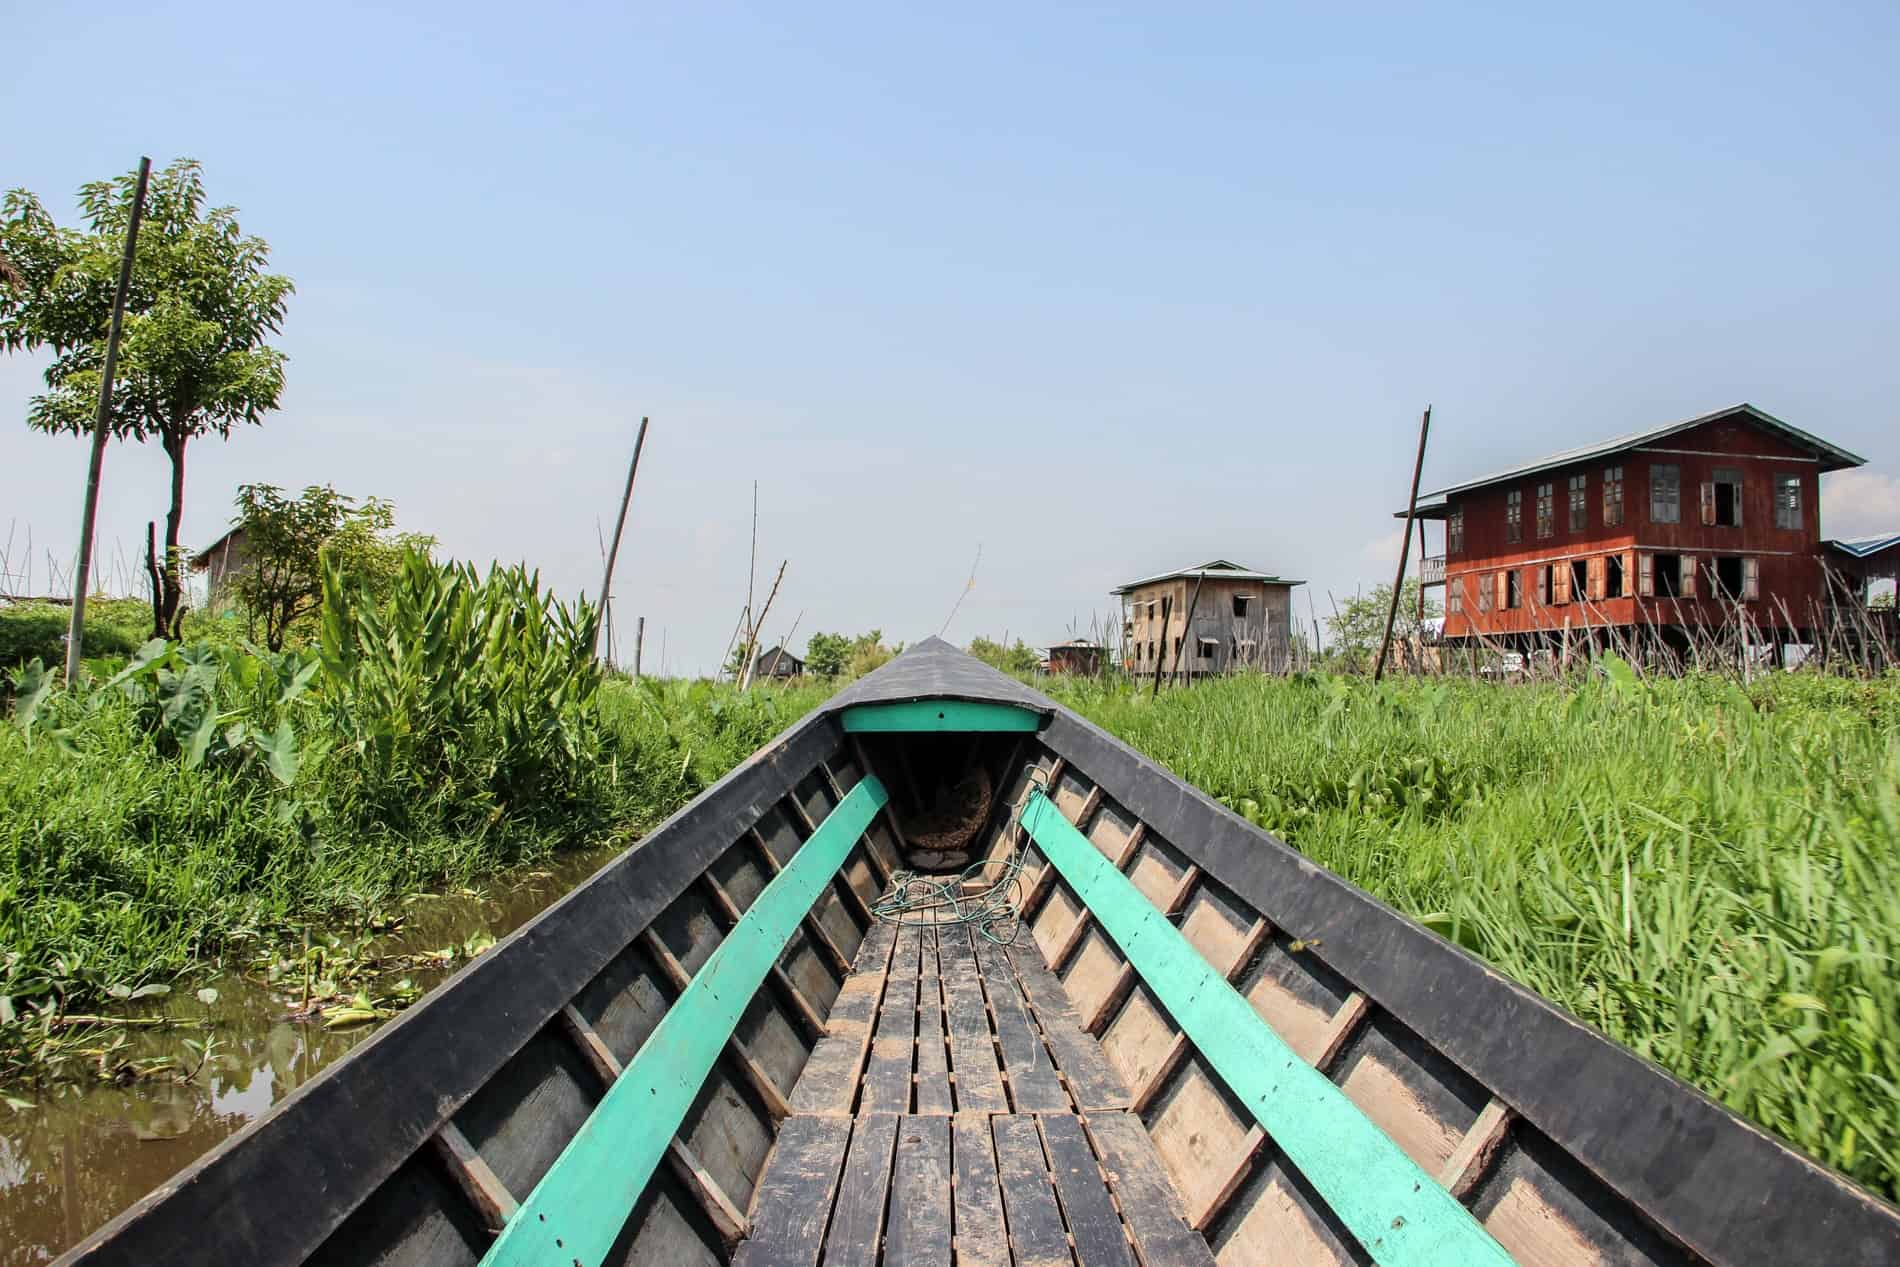 A long wooden boat with mint green paint colouring moves forward through a narrow canal on Inle Lake lined with floating green gardens and large wooden stilt houses. 